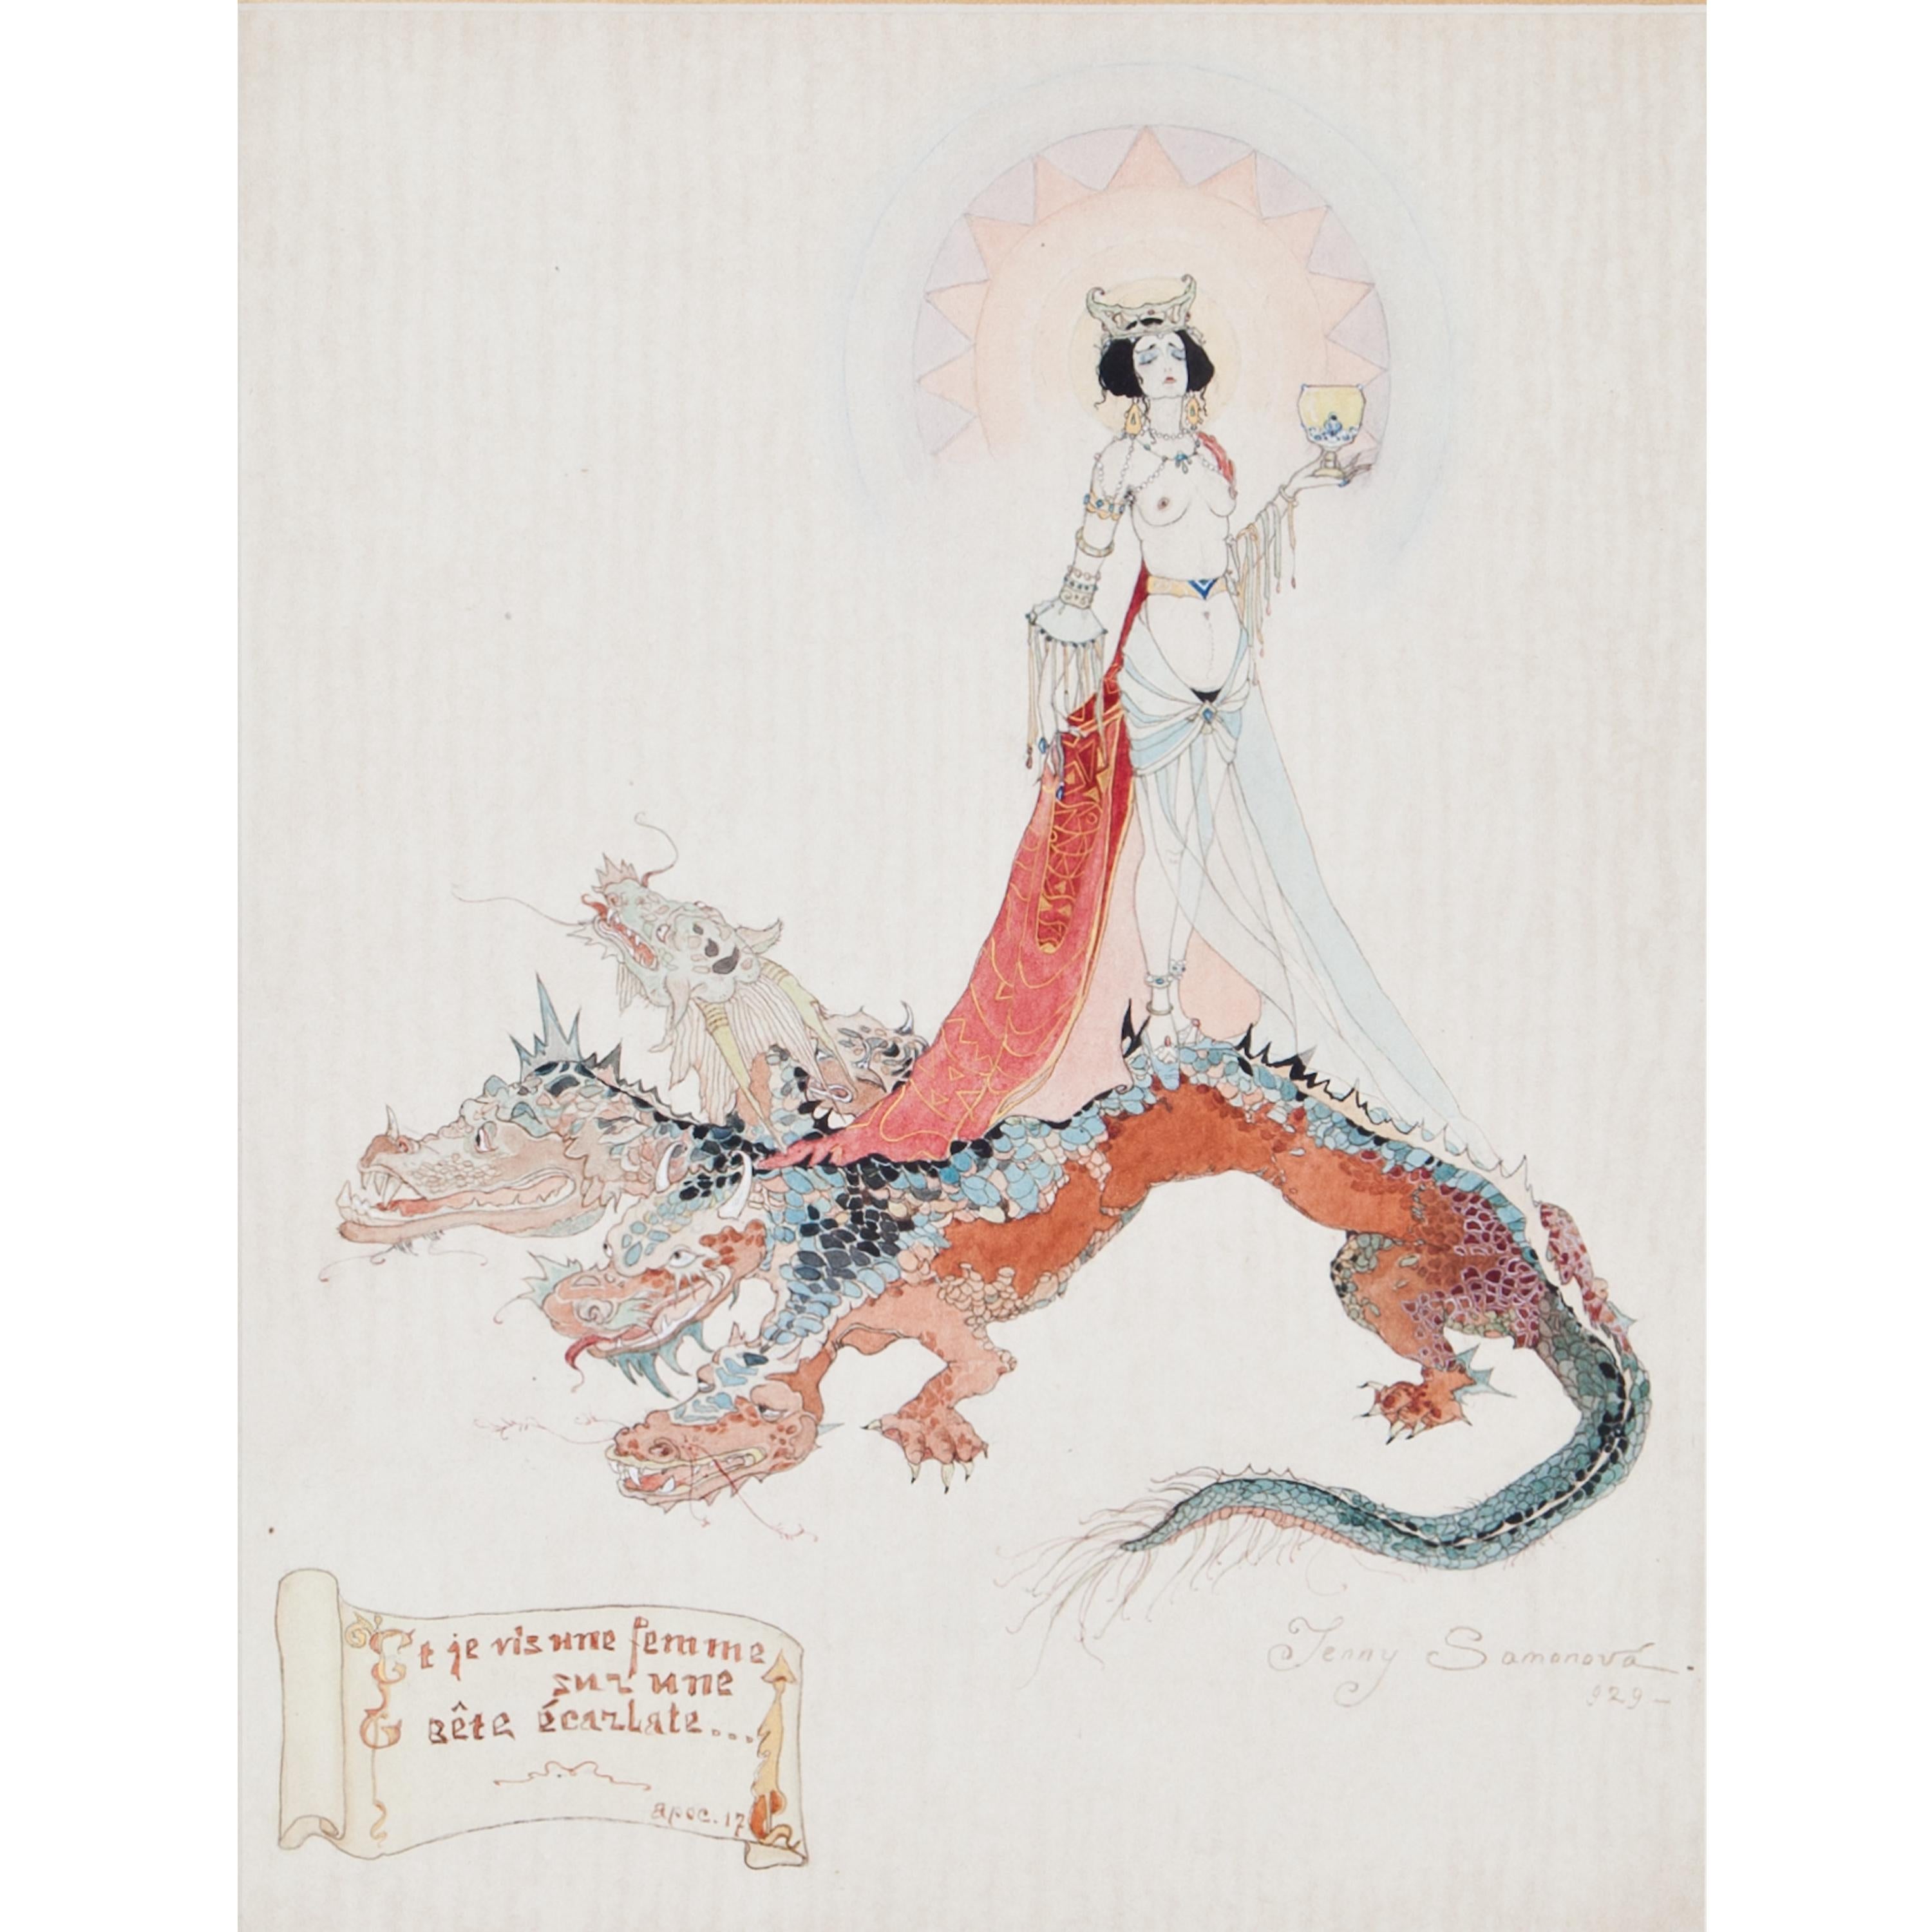 Watercolour on paper with depiction of a female nude with chalice and crown standing on a multi-headed dragon. Inscribed "Et je vis une femme sur une bête écarlate..." Apoc. 17.
Signed and dated lower right
Framed behind glass in Passe